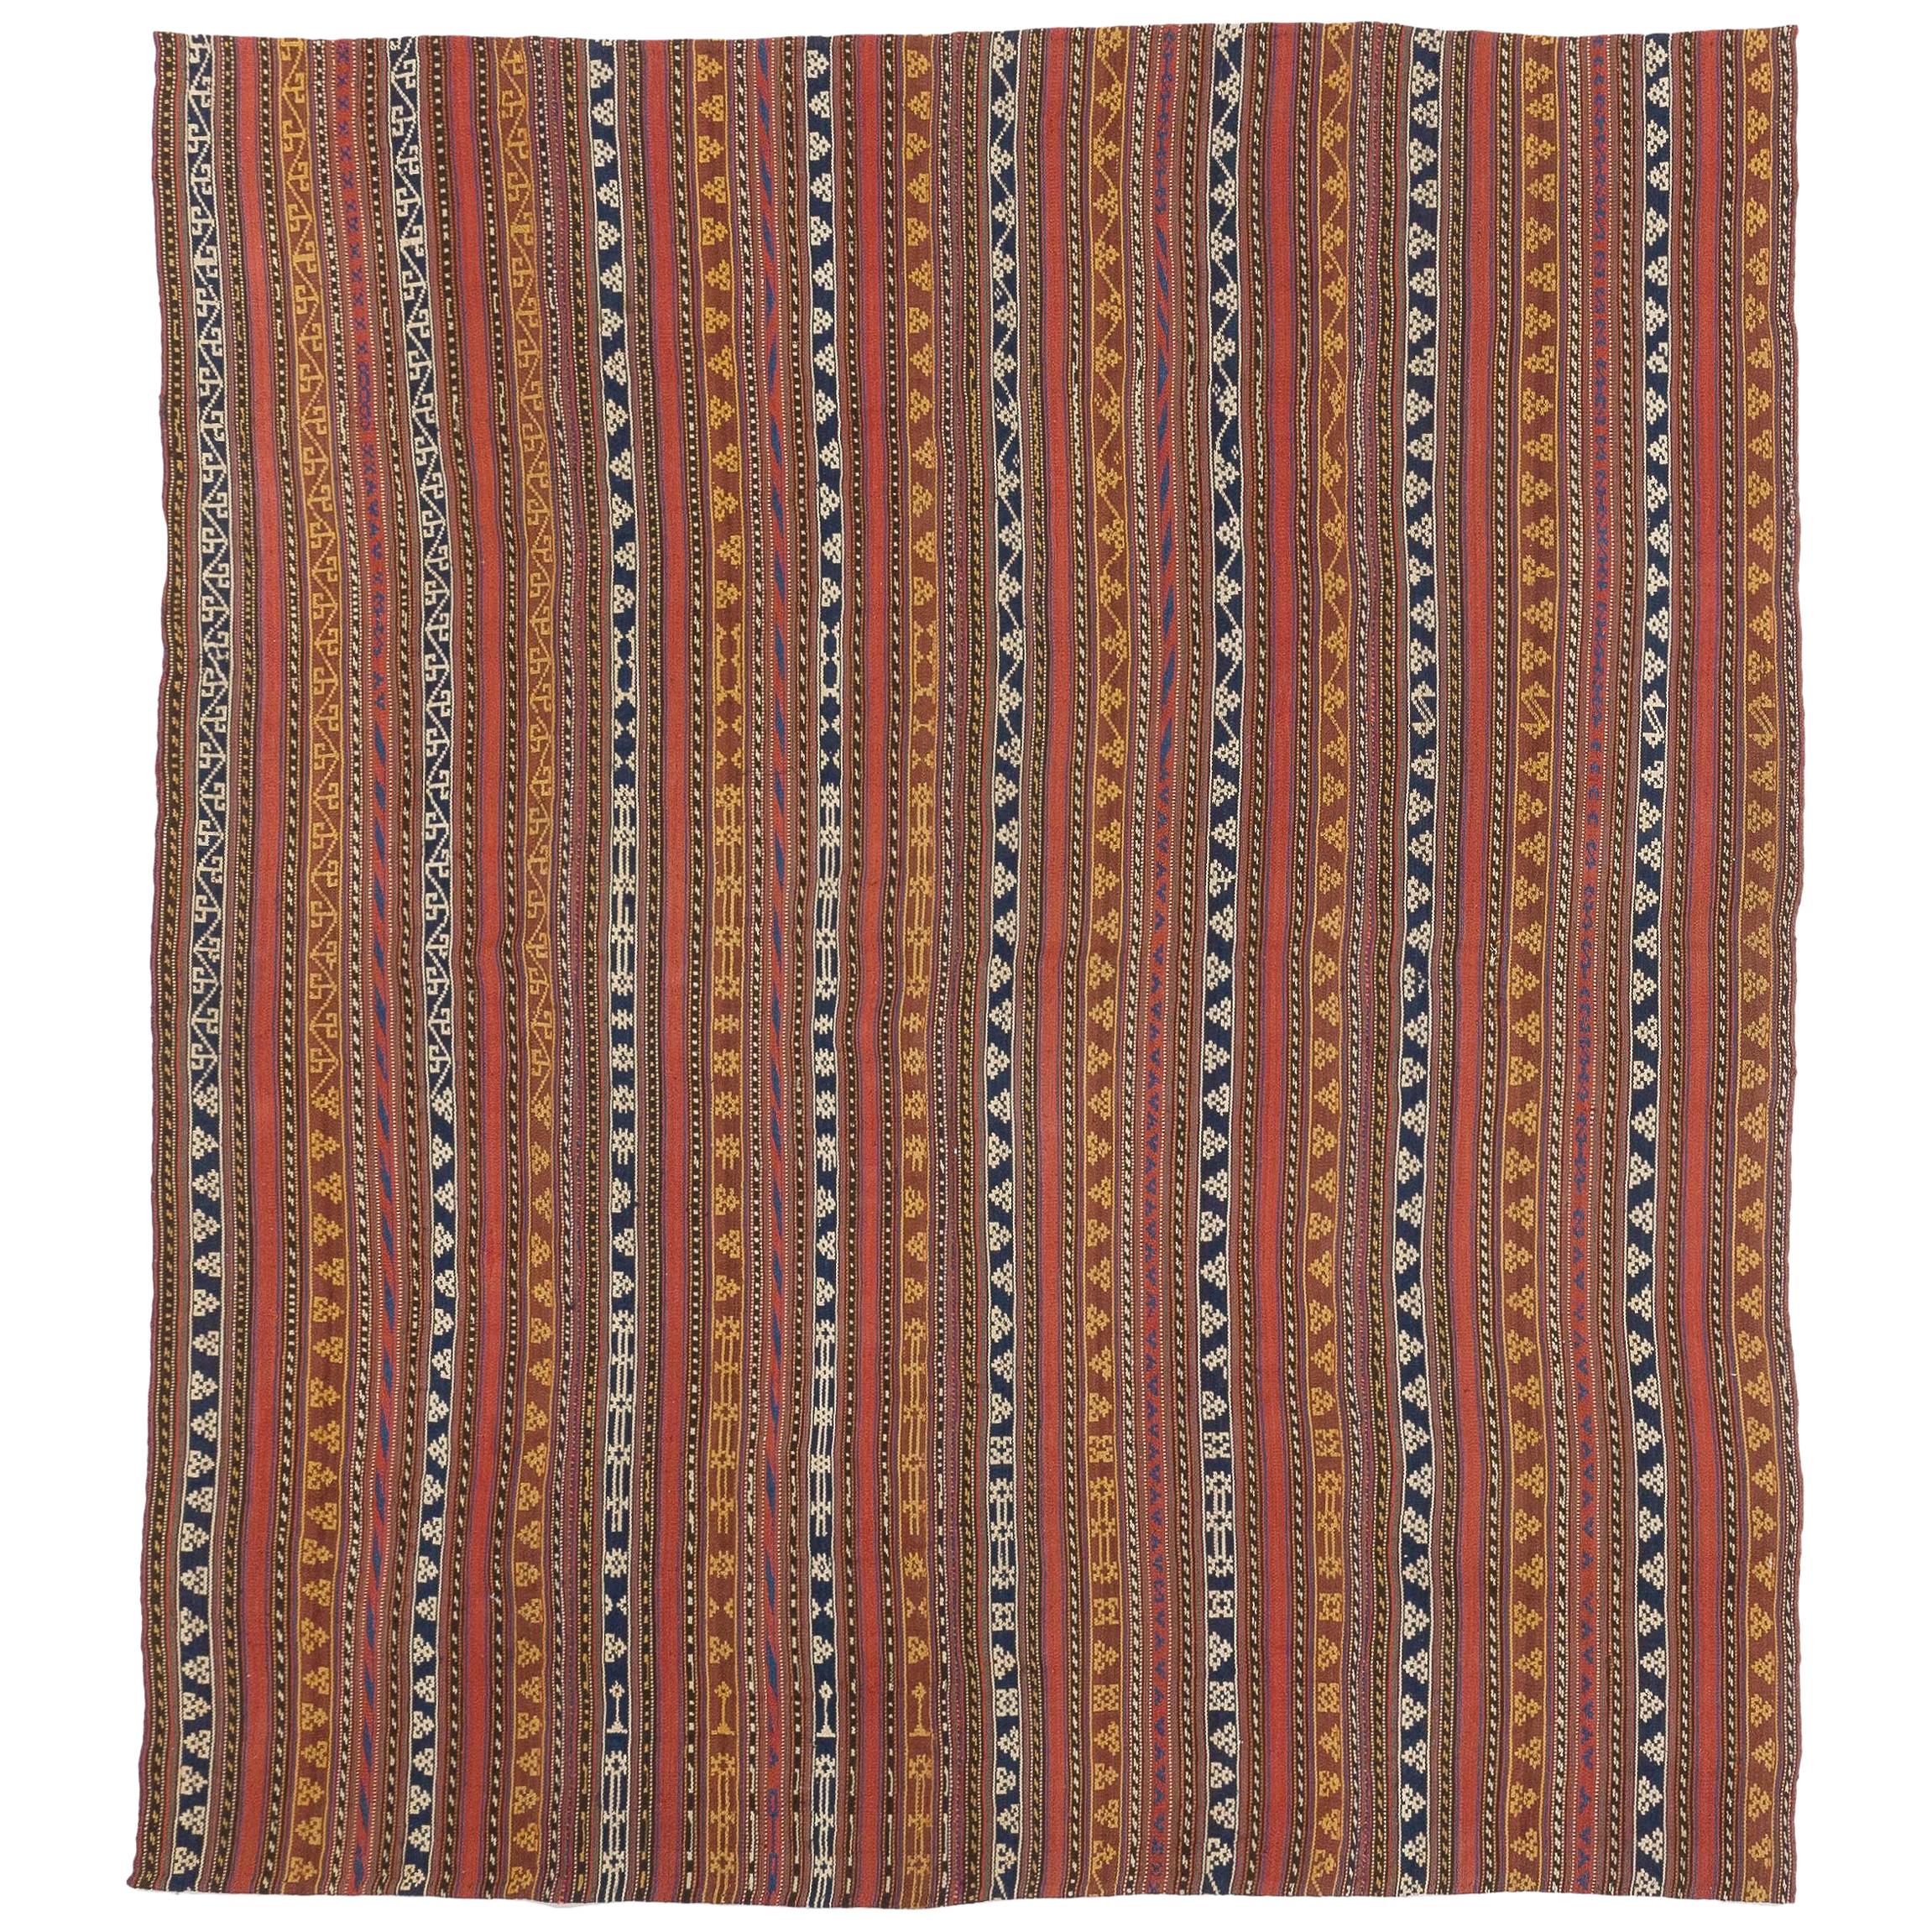 Antique Persian Flat-Weave Jajim Rug with Tribal Details on Colored Stripes For Sale